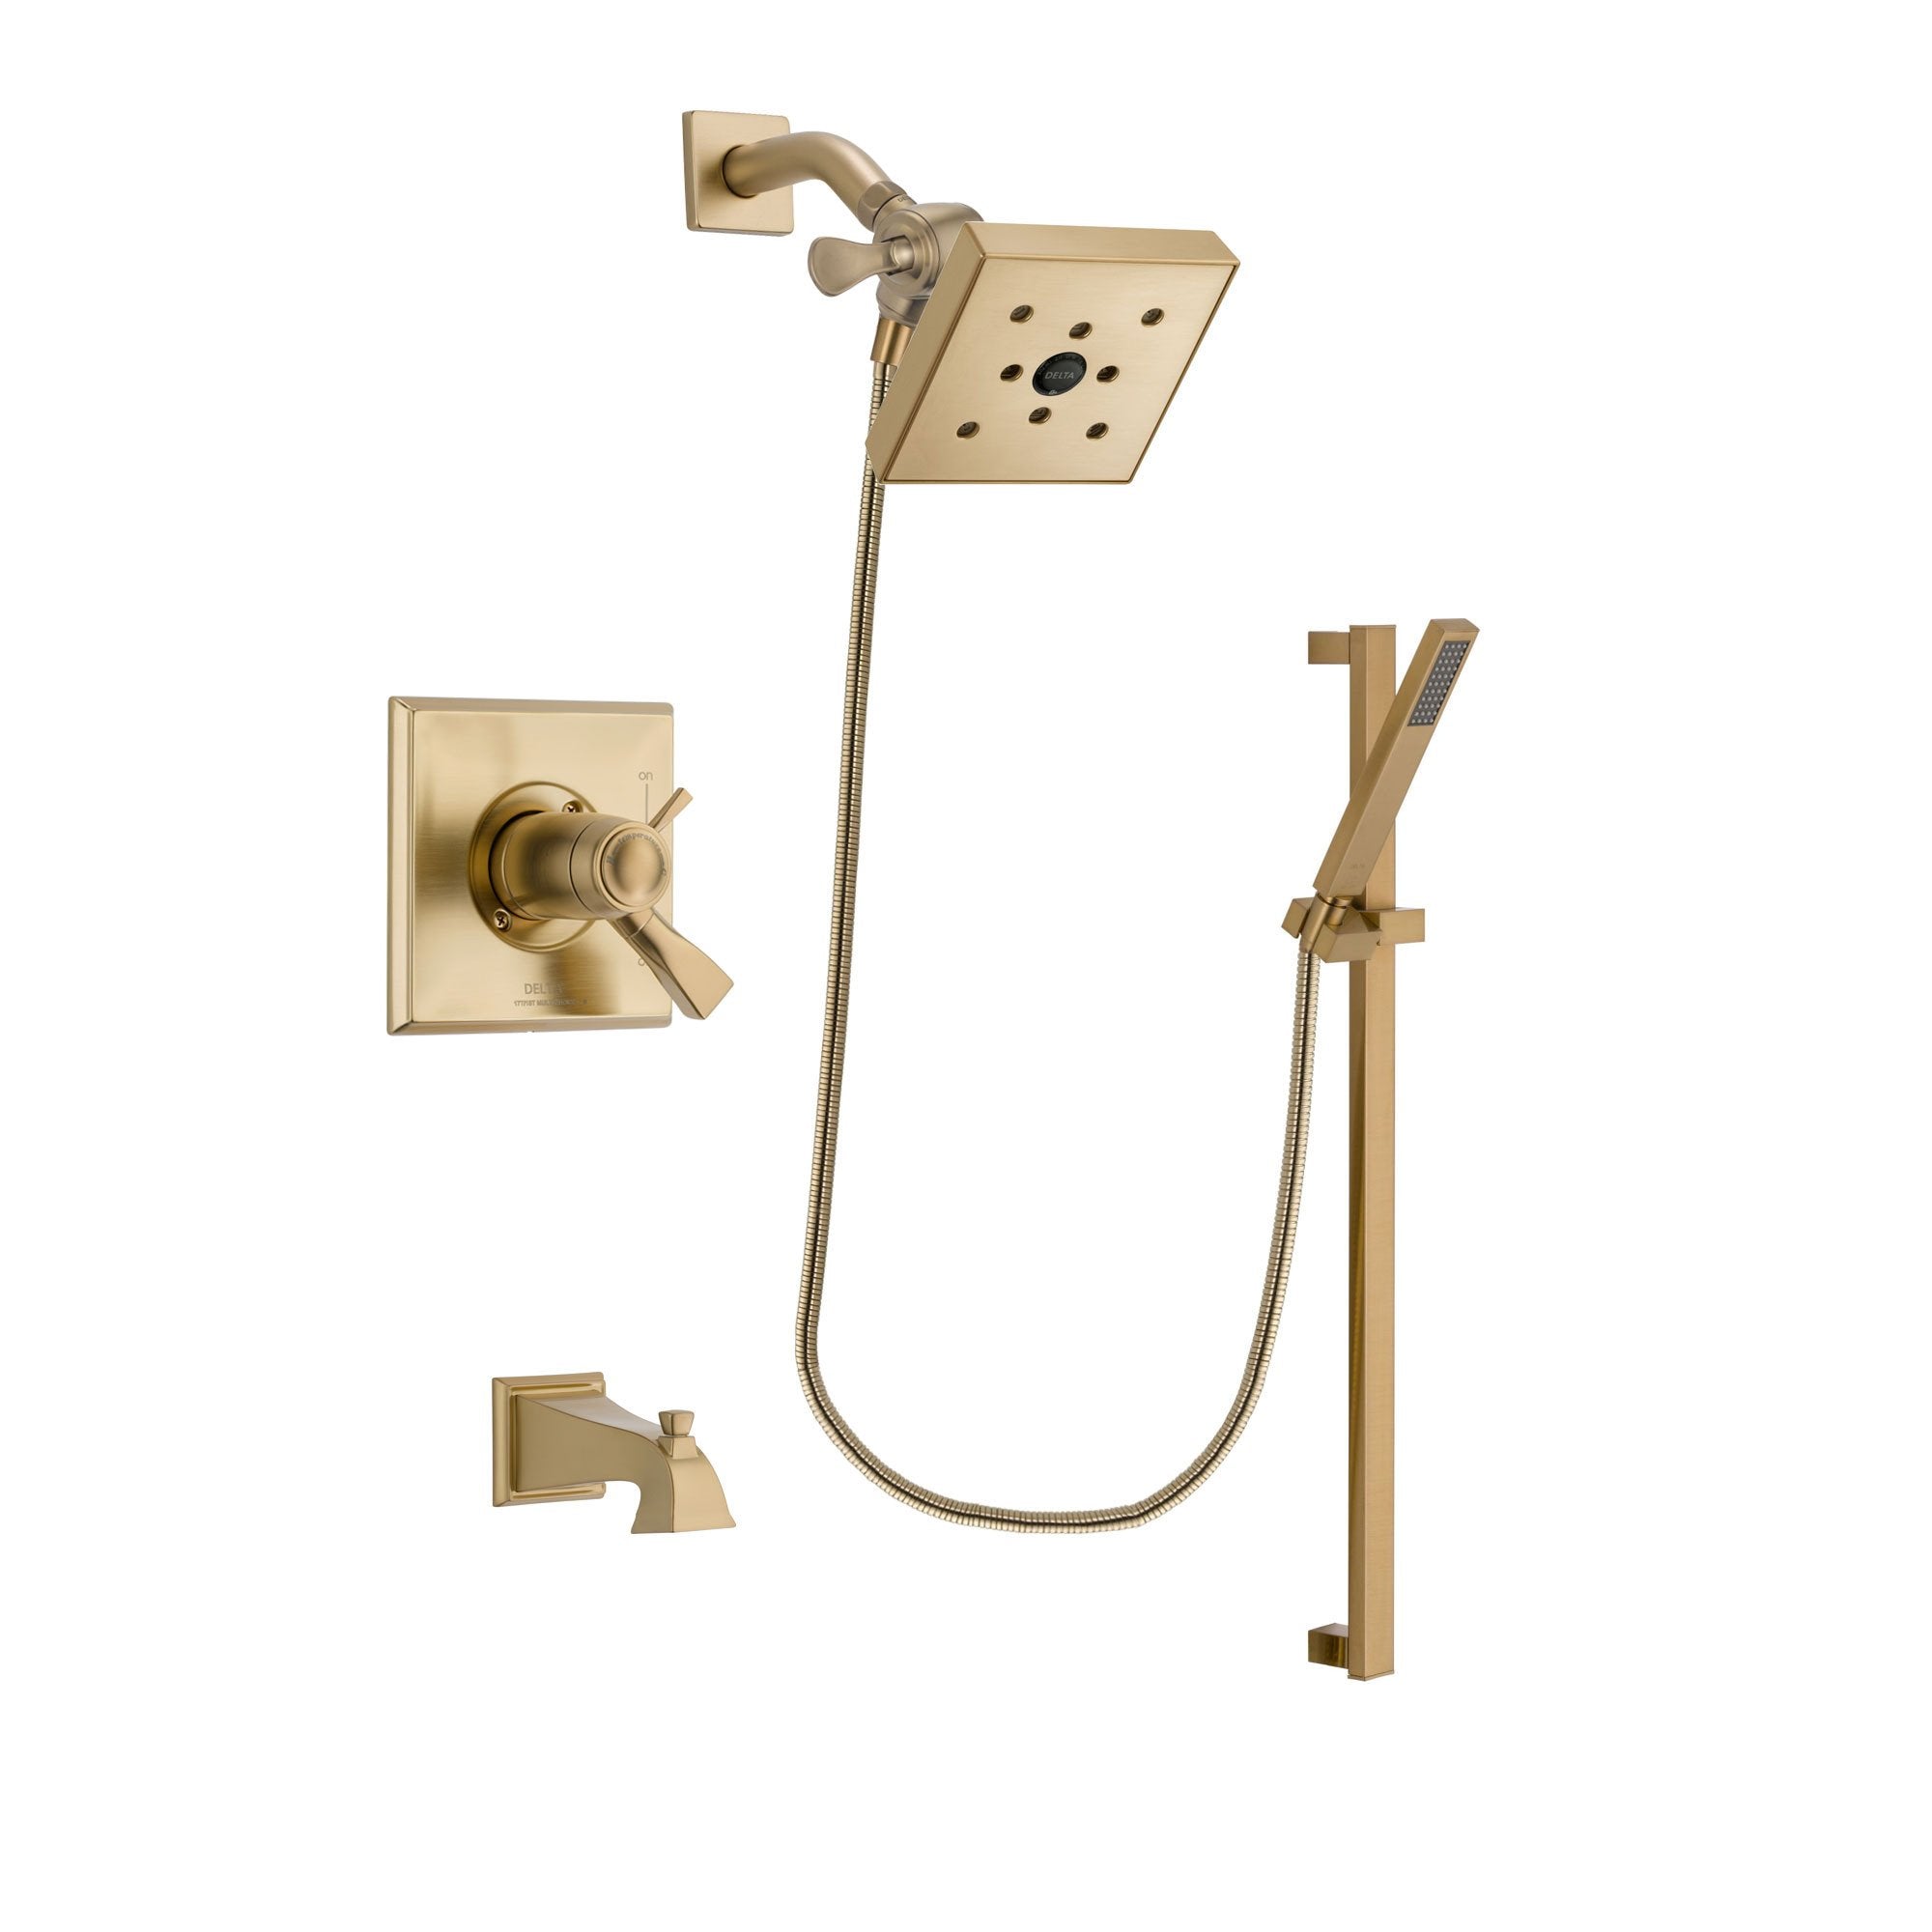 Delta Dryden Champagne Bronze Finish Thermostatic Tub and Shower Faucet System Package with Square Shower Head and Modern Handheld Shower with Square Slide Bar Includes Rough-in Valve and Tub Spout DSP4005V